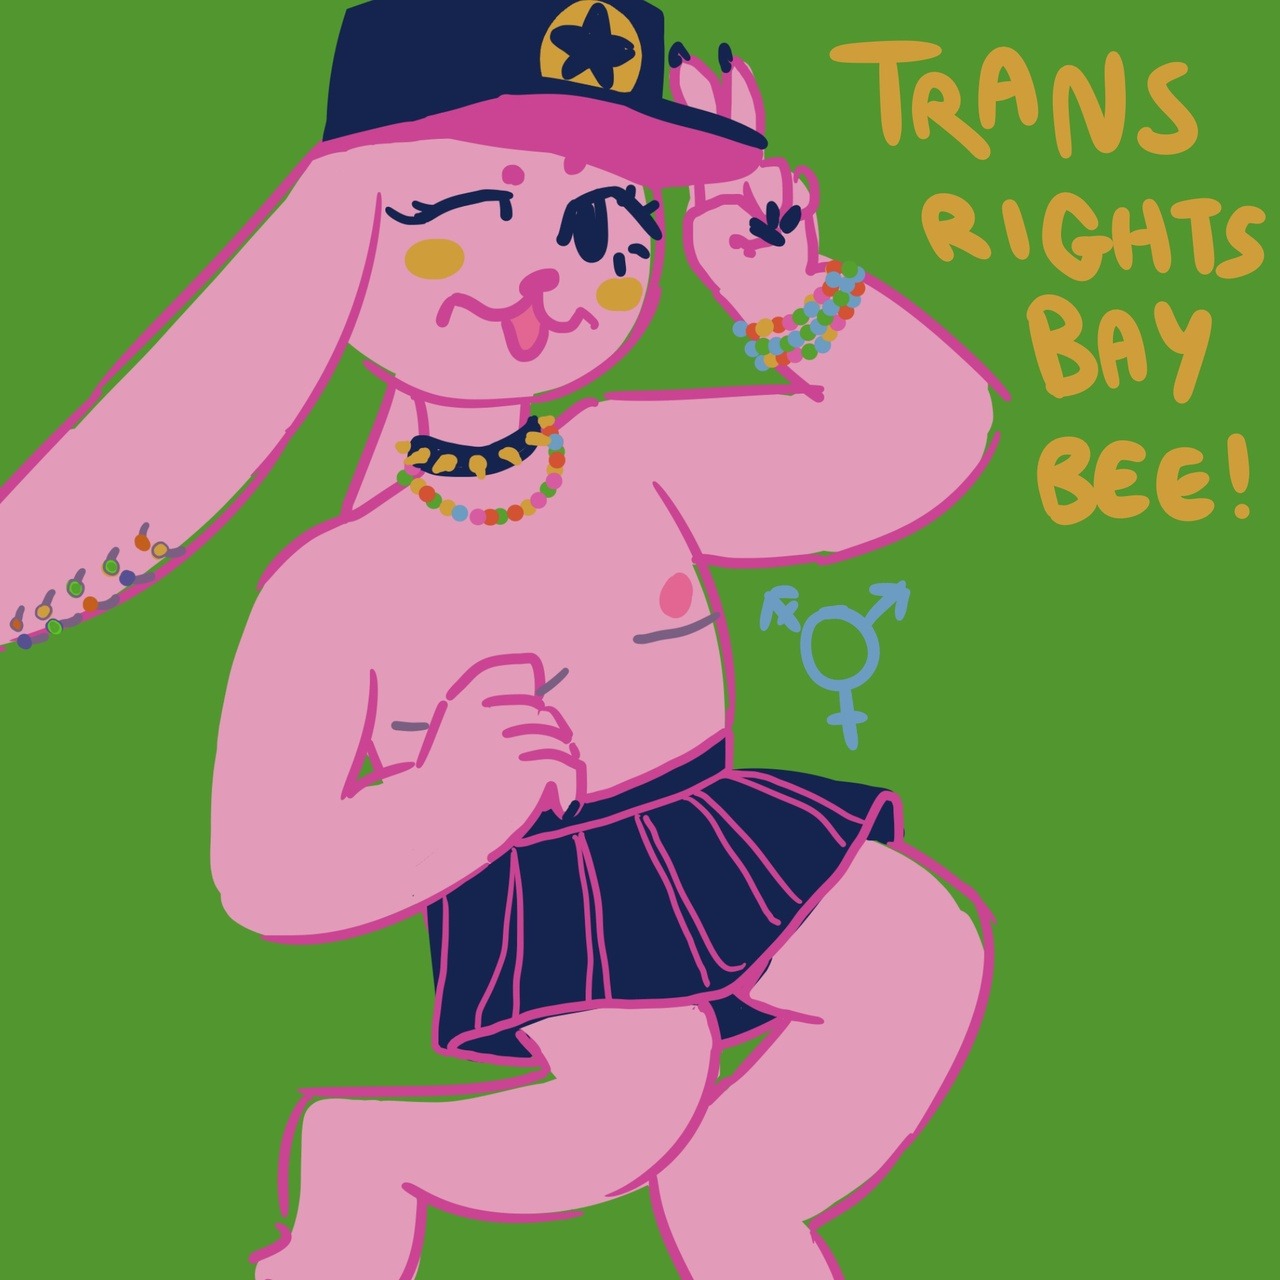 trans rights baybee!!